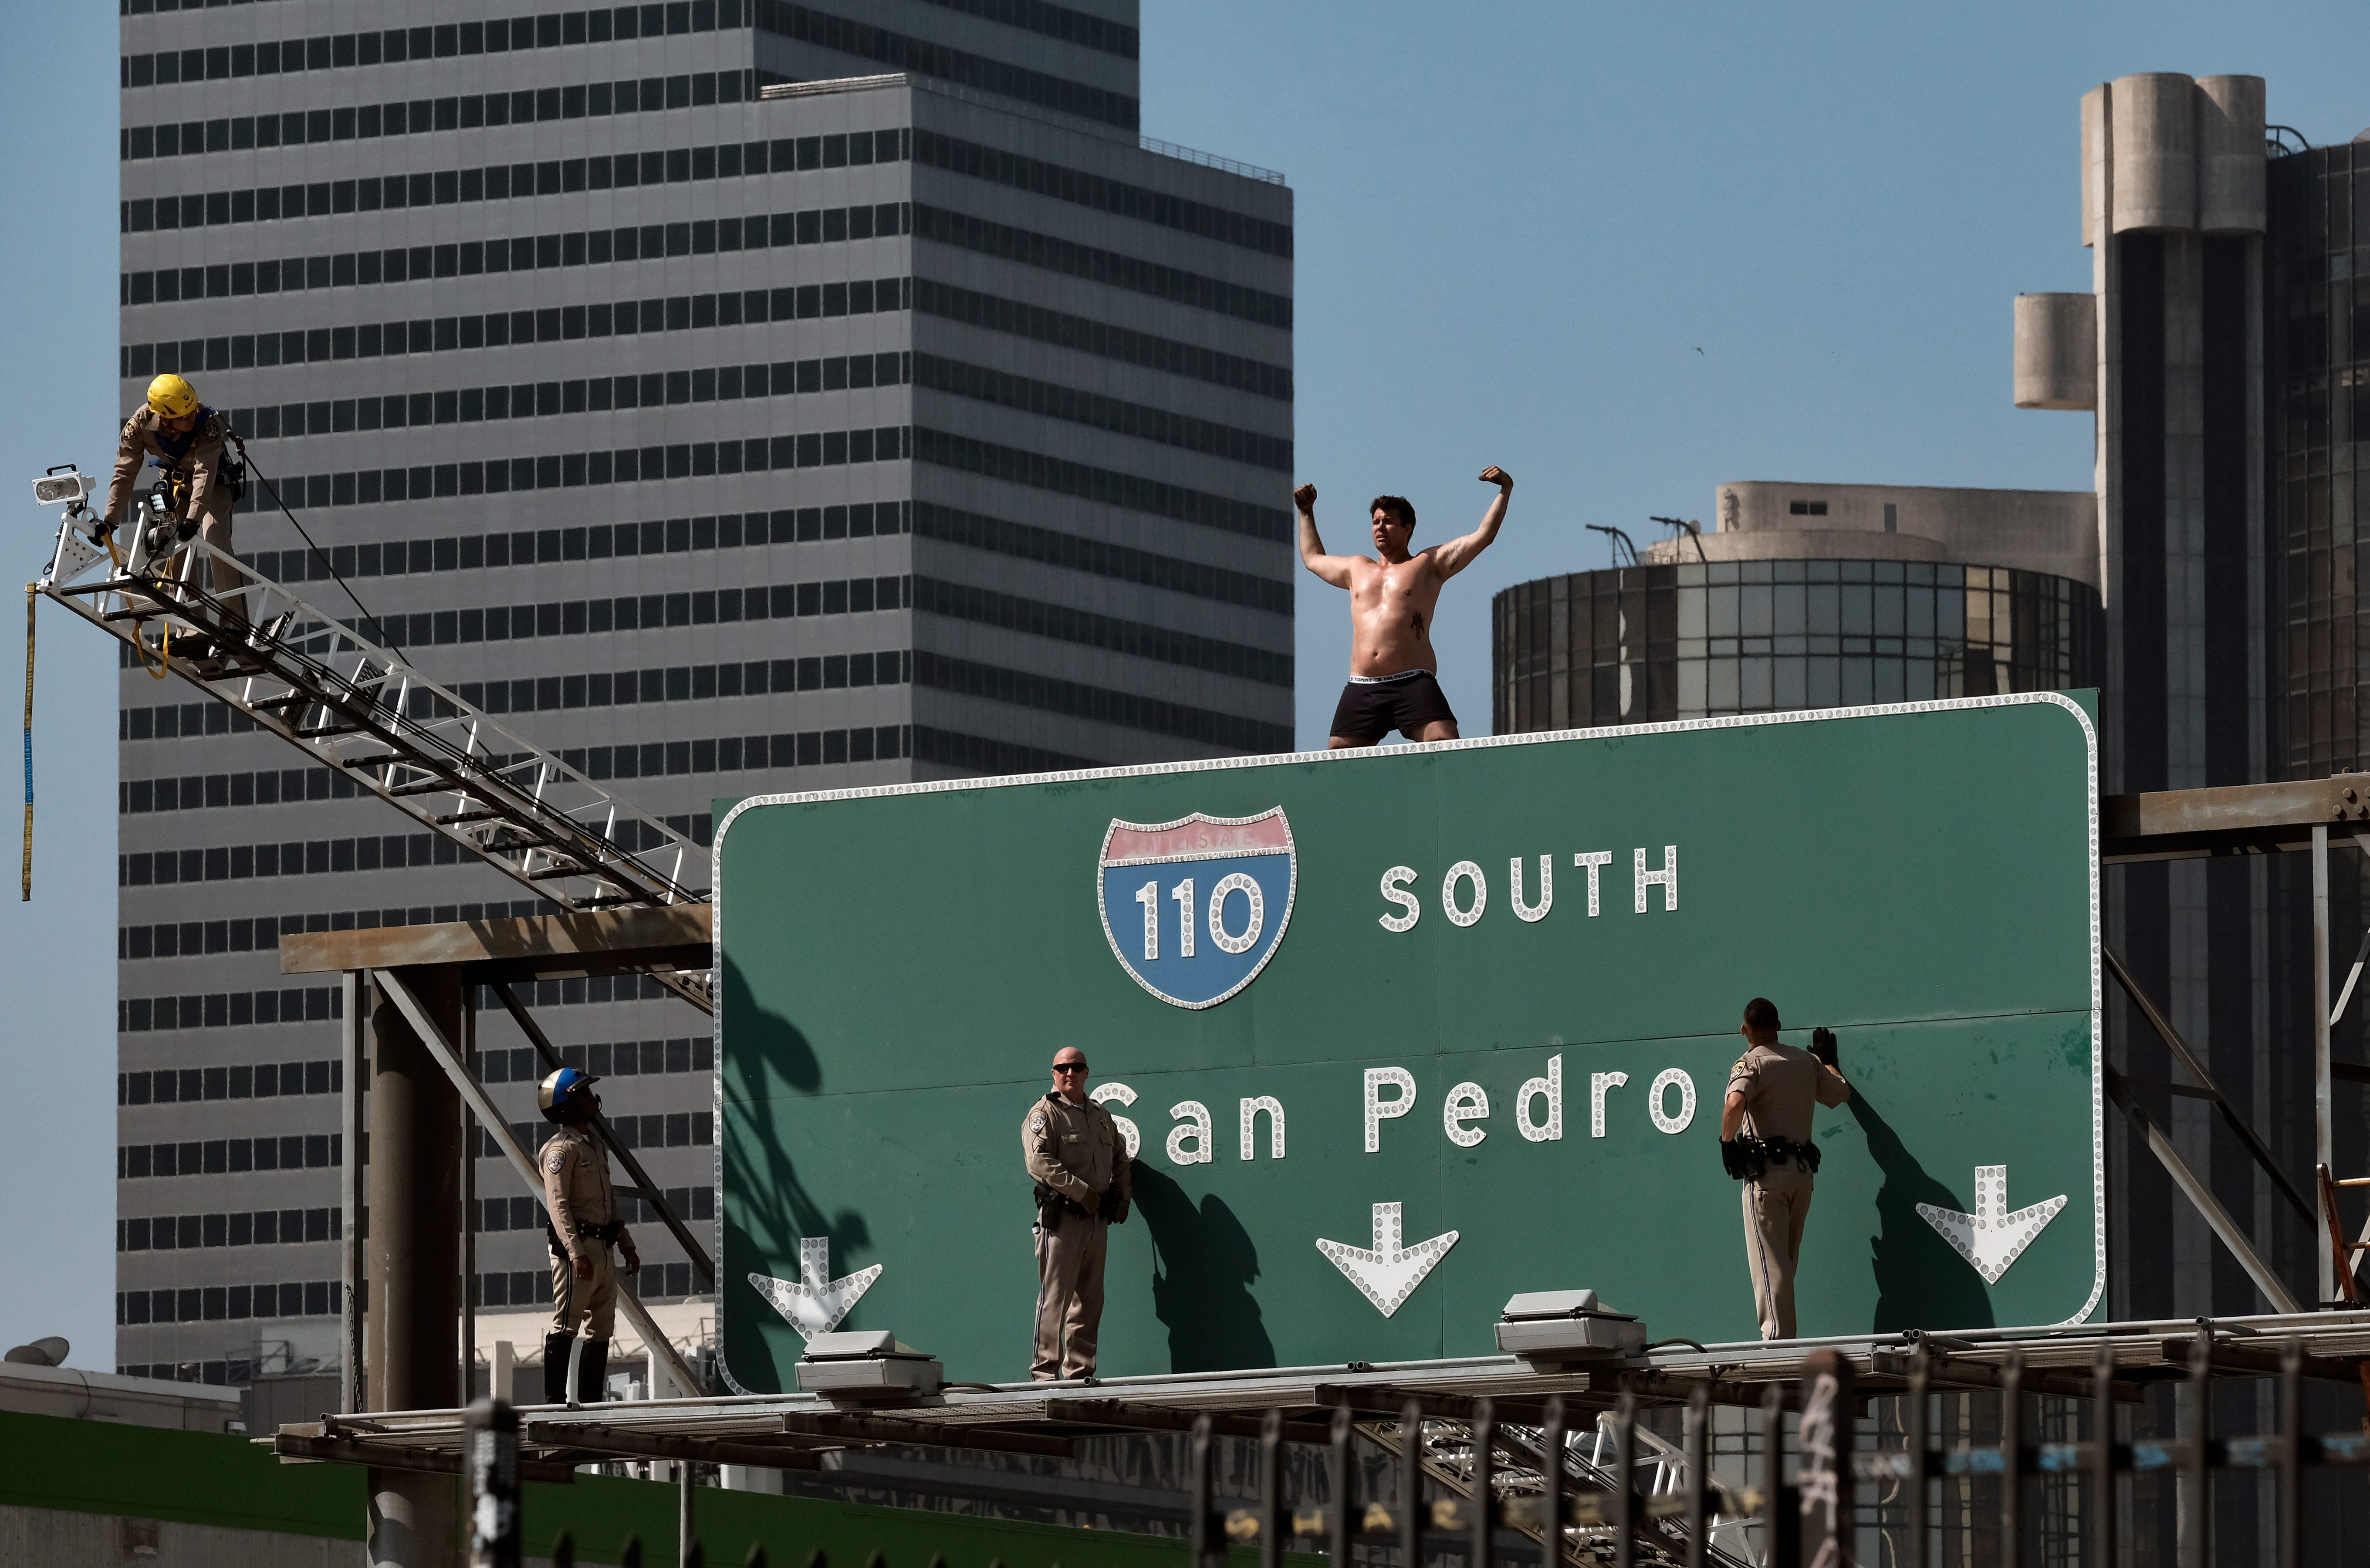 California Highway Patrol officers try to coax a man off a freeway sign in downtown Los Angeles. The man suspended banners, one about fighting pollution, after climbing onto the sign over State Route 110 during  morning rush hour.